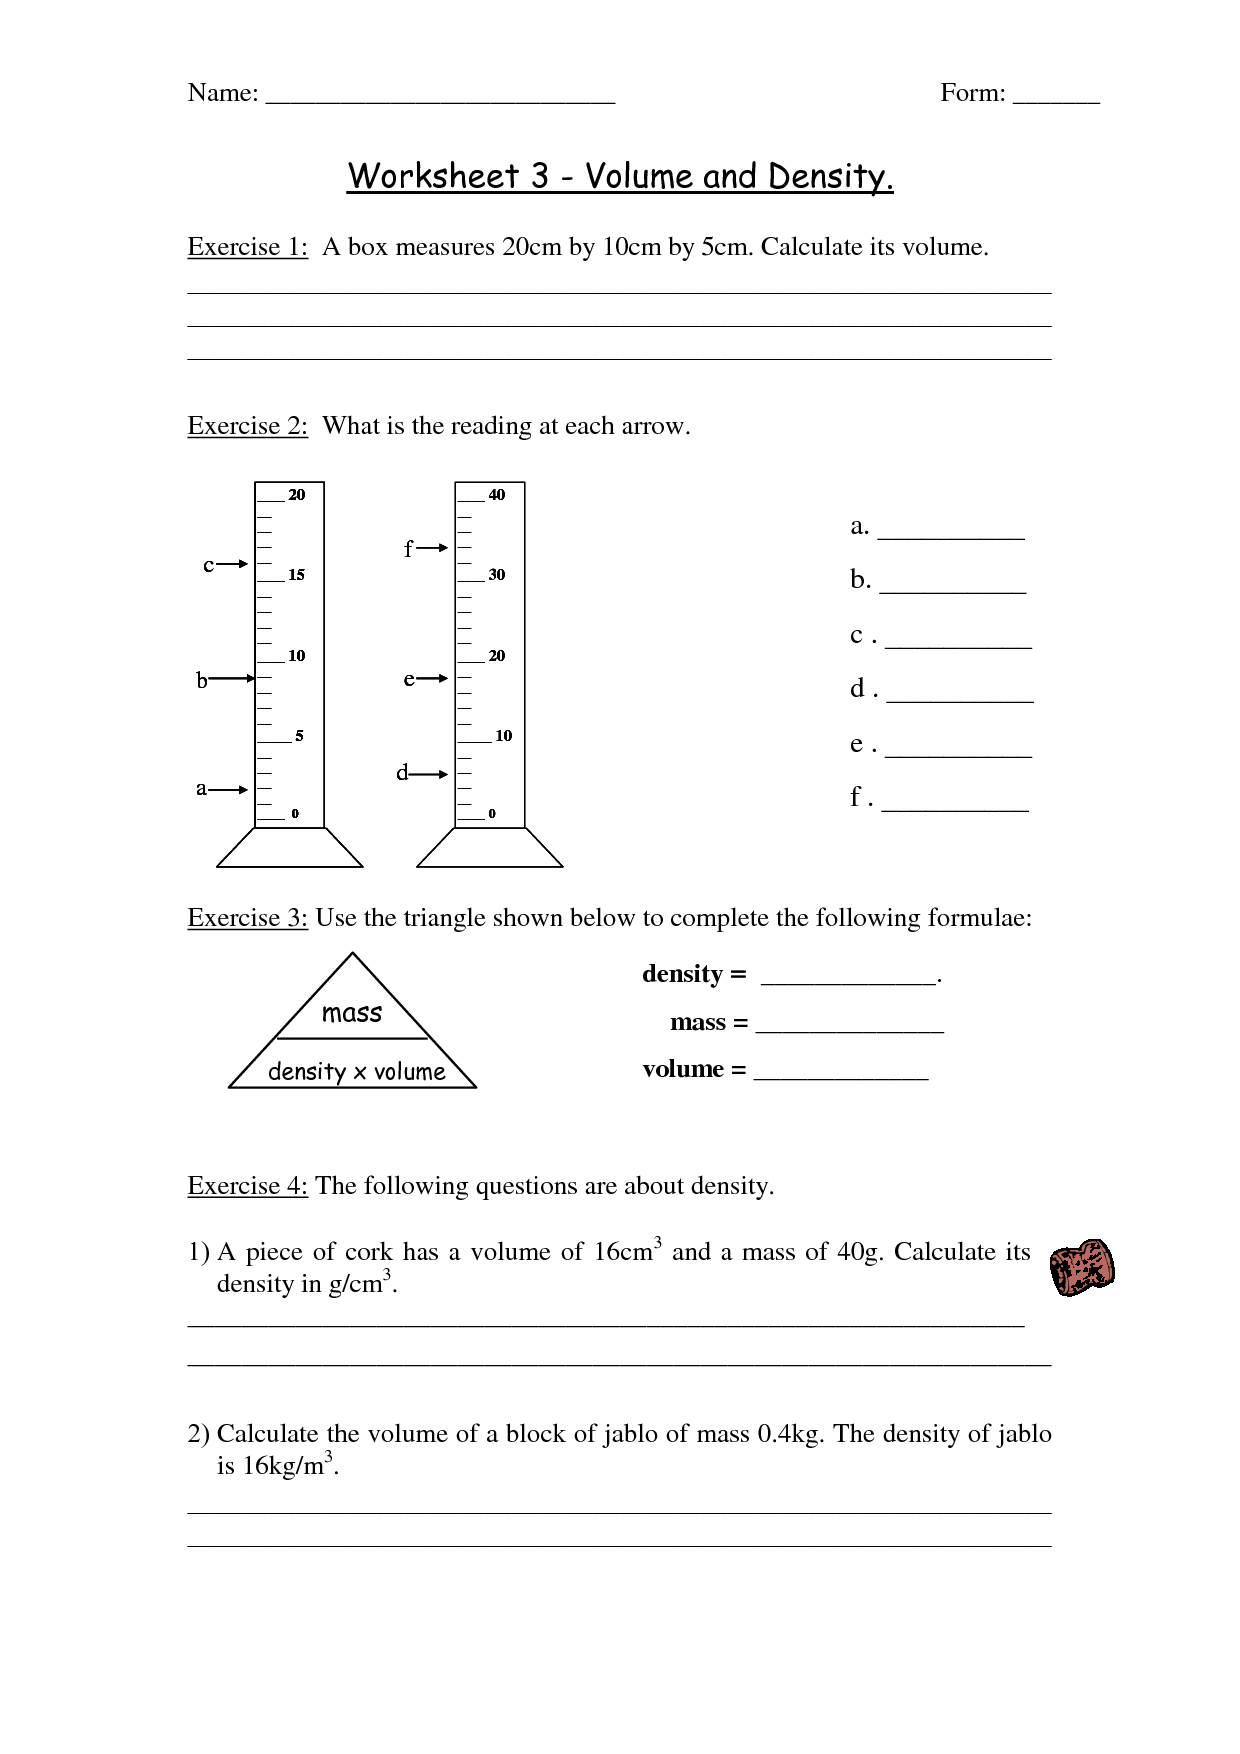 14-best-images-of-mass-and-volume-worksheets-density-mass-and-volume